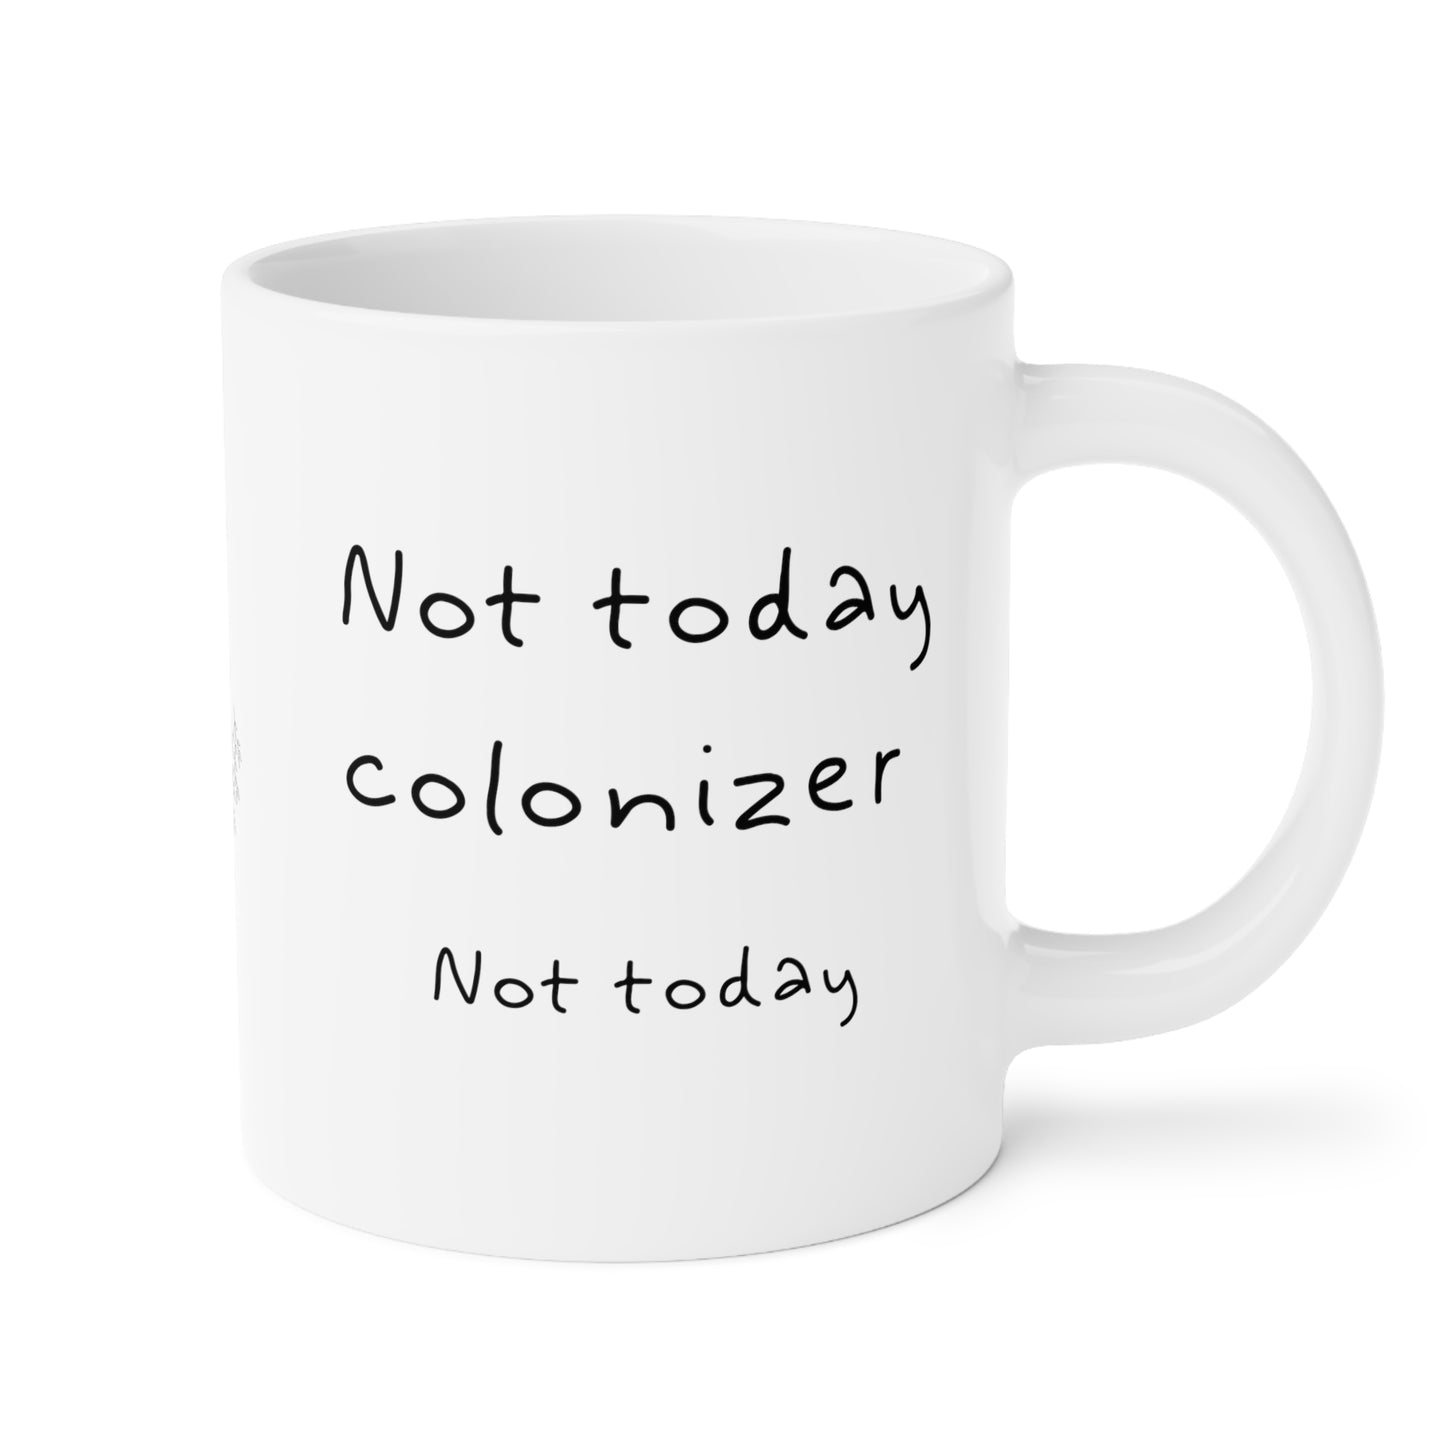 Not Today colonizer, Not Today // Mug